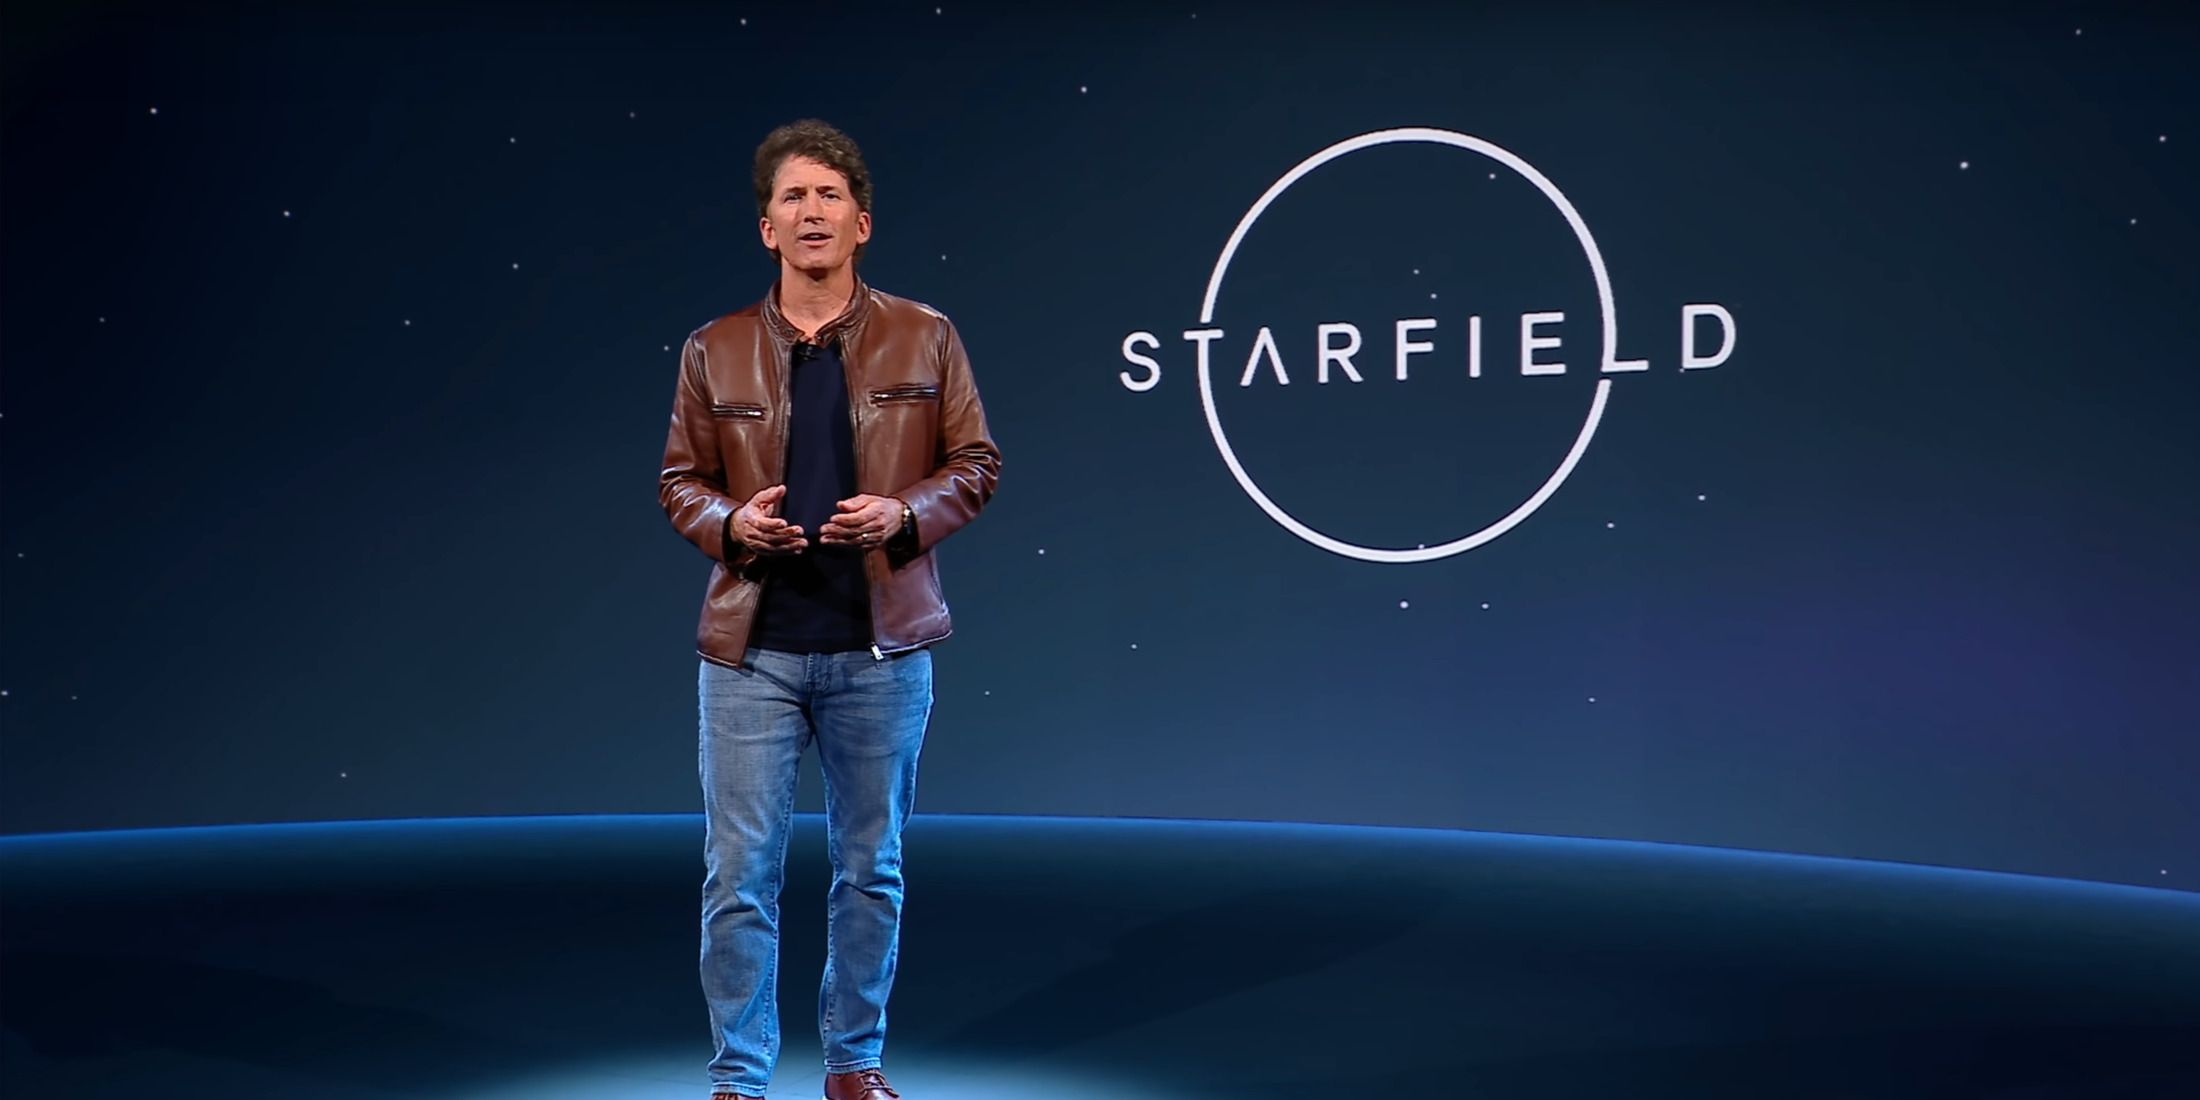 todd howard next to a starfield logo